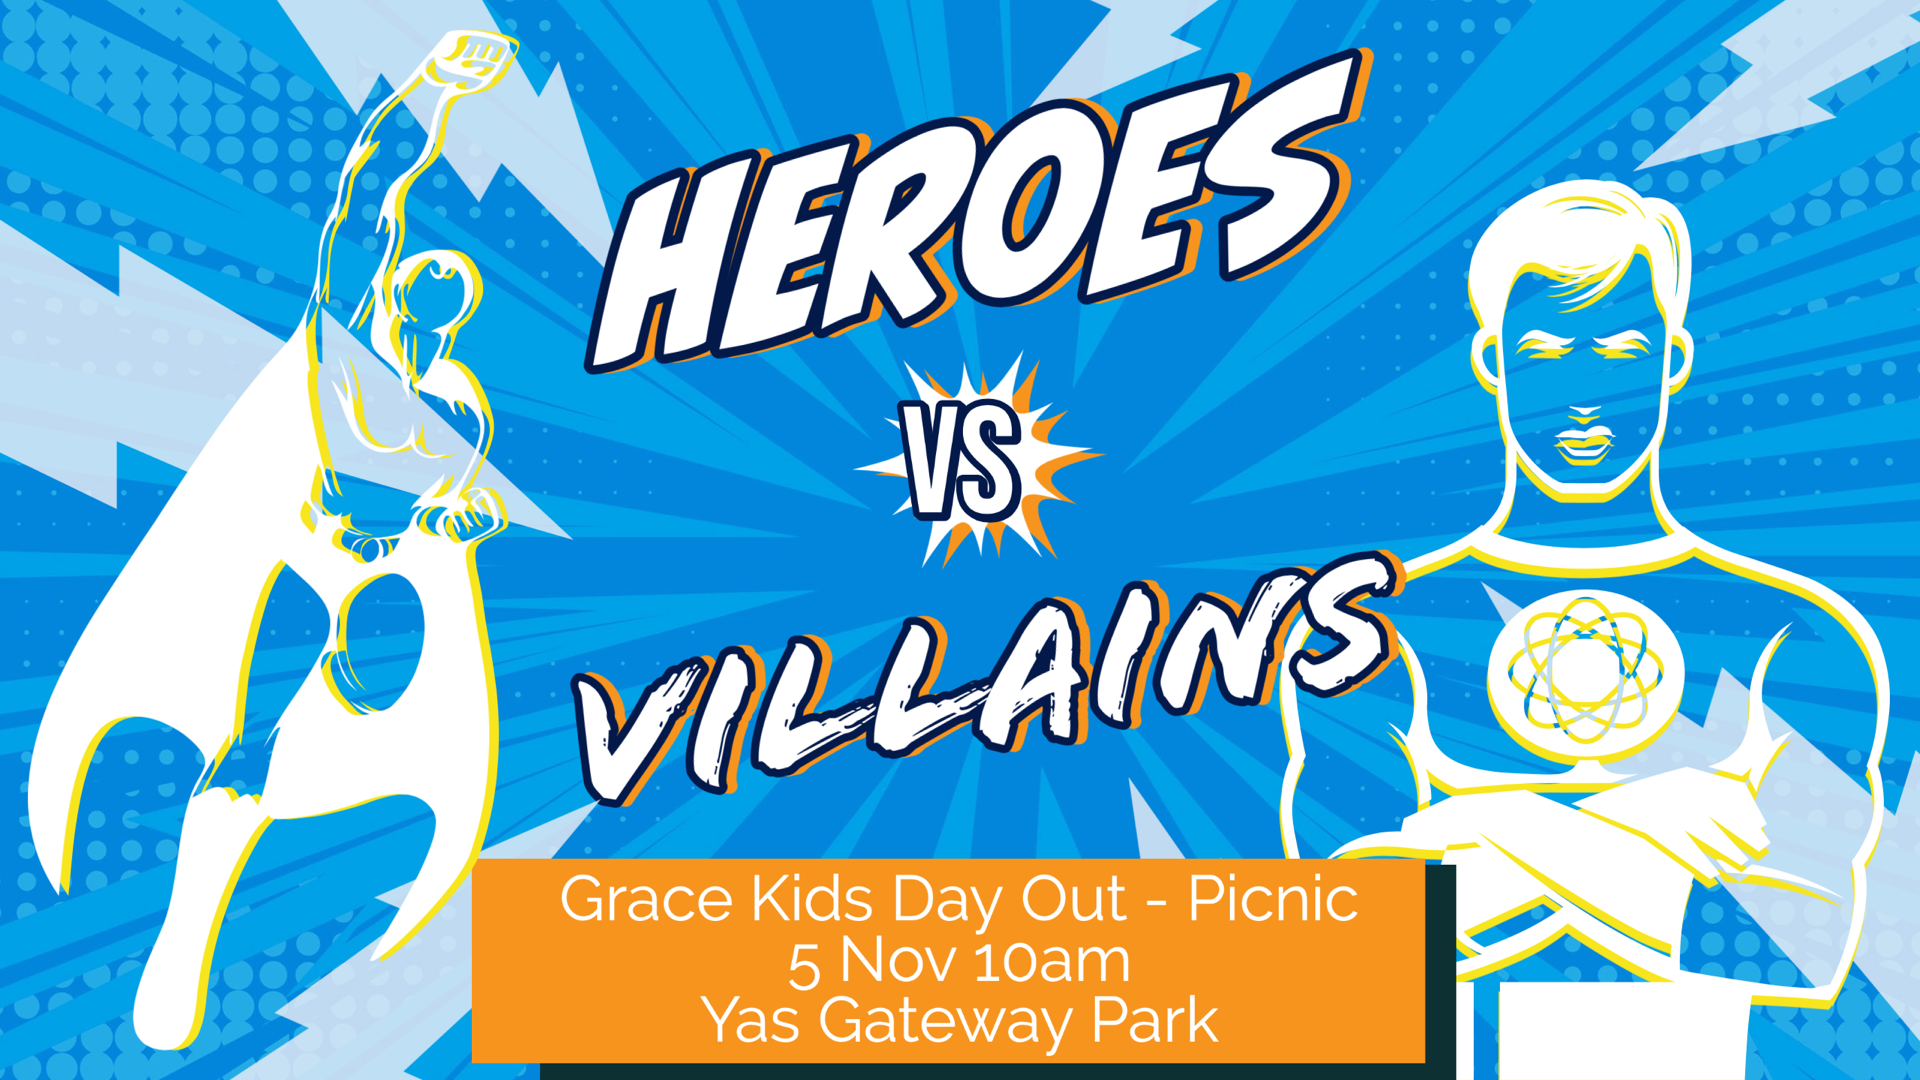 Grace Kids Day Out image